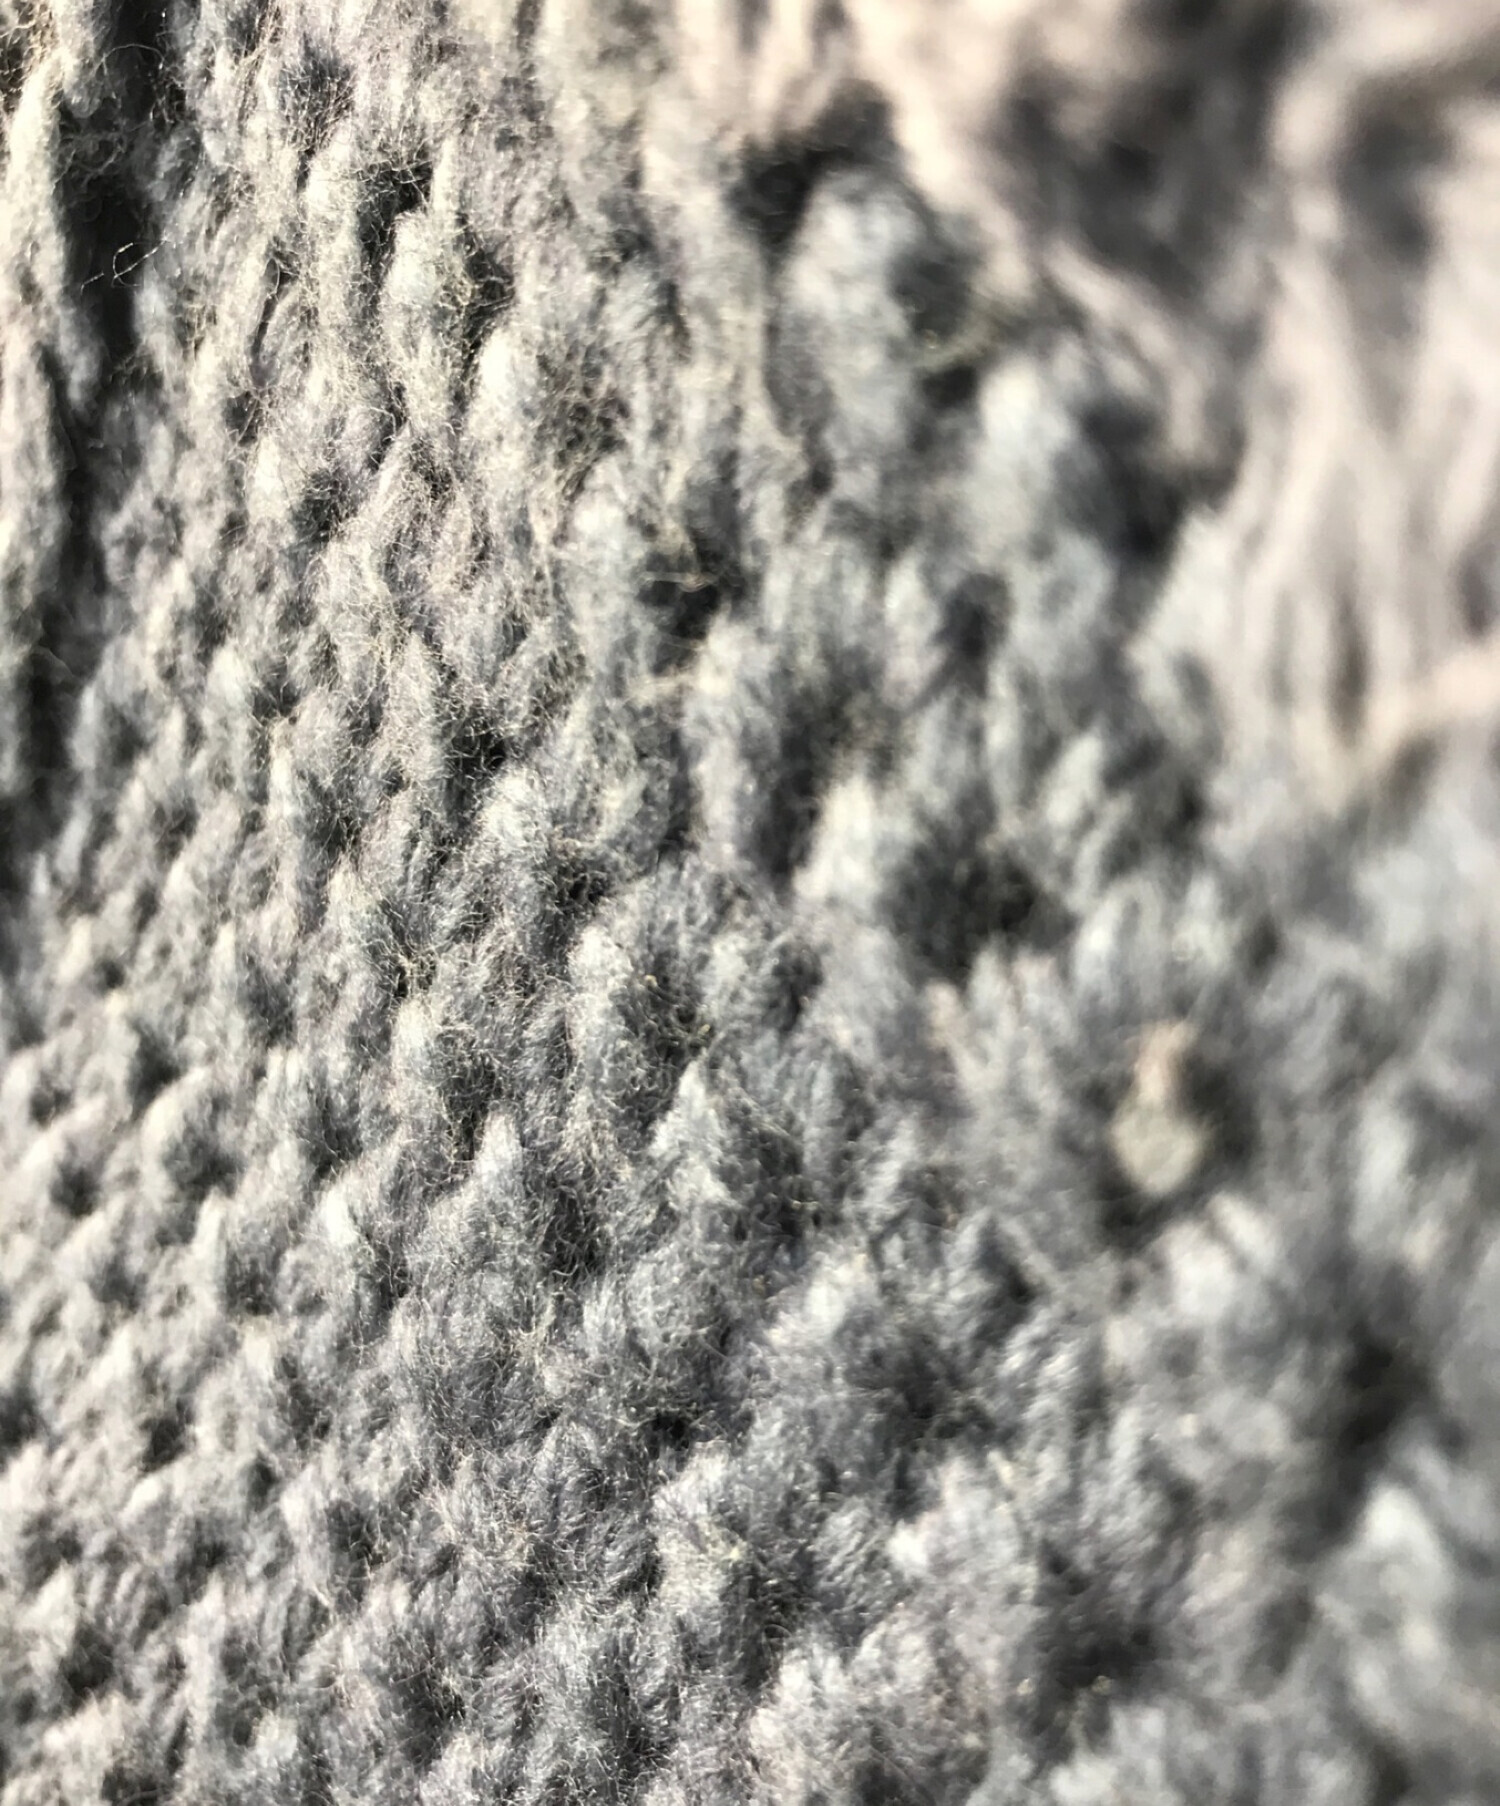 WIDE CHECK HAND KNIT CLANE